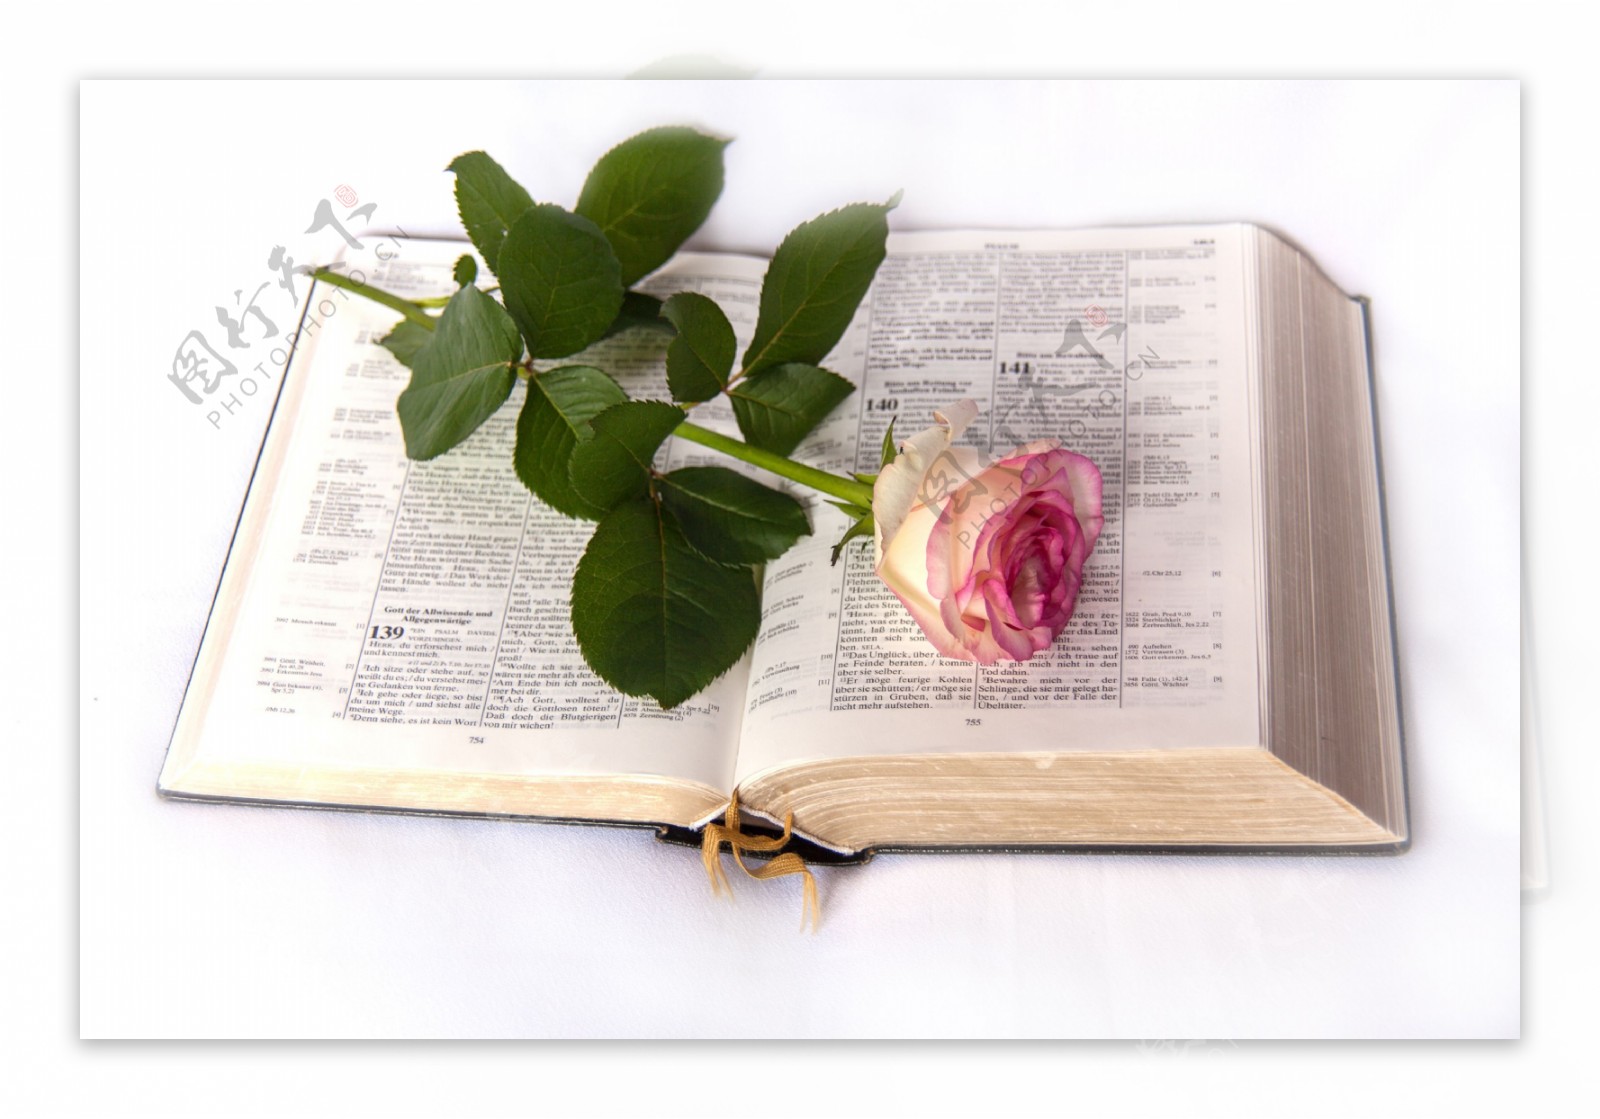 A Red Rose on an Open Book · Free Stock Photo